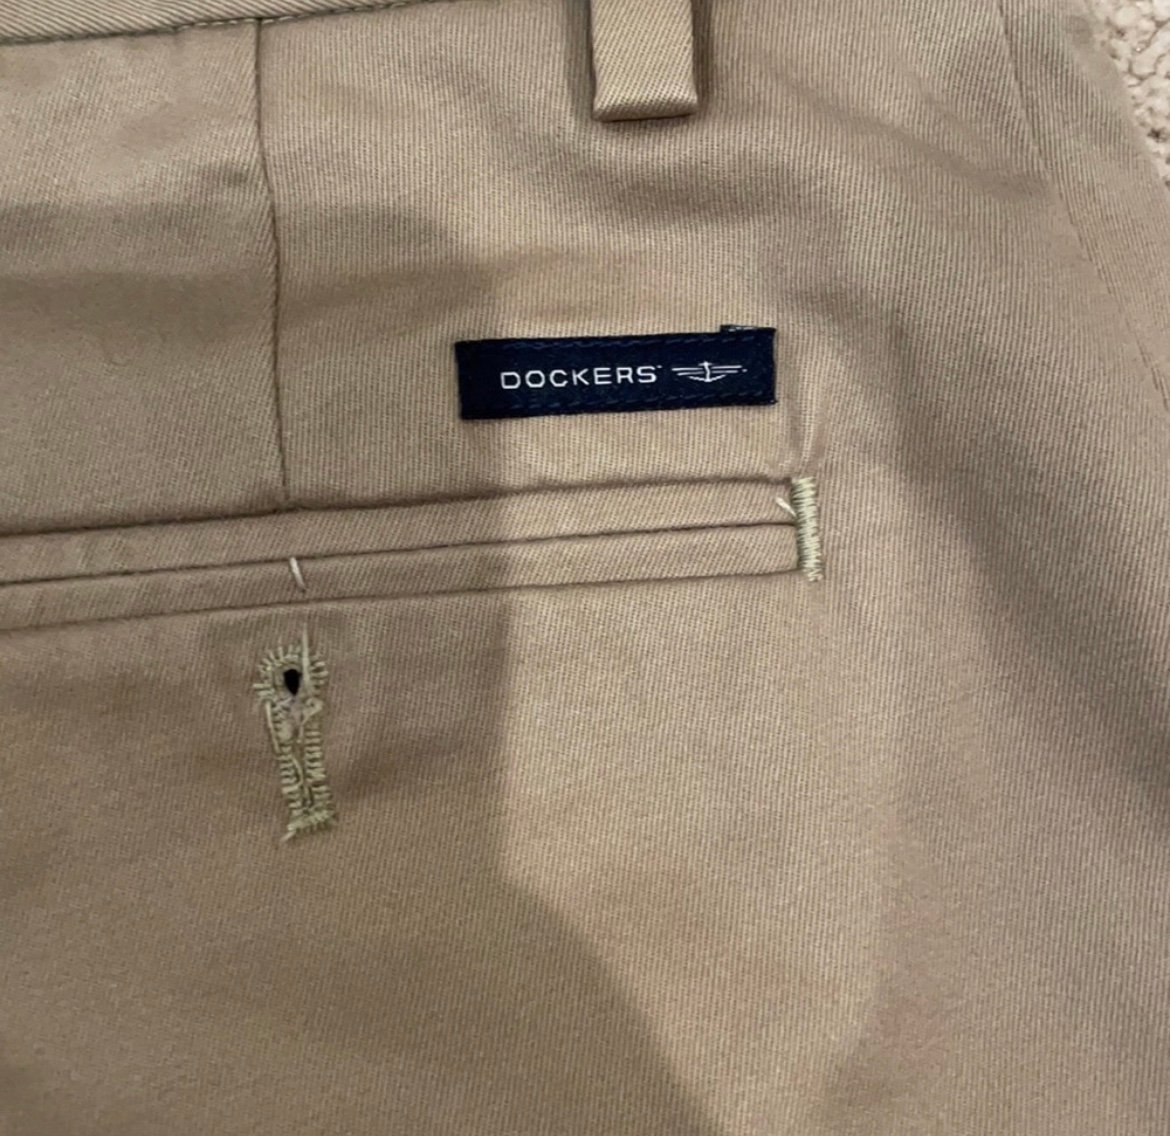 Personality Dockers pants iSlfeDsew Low Price